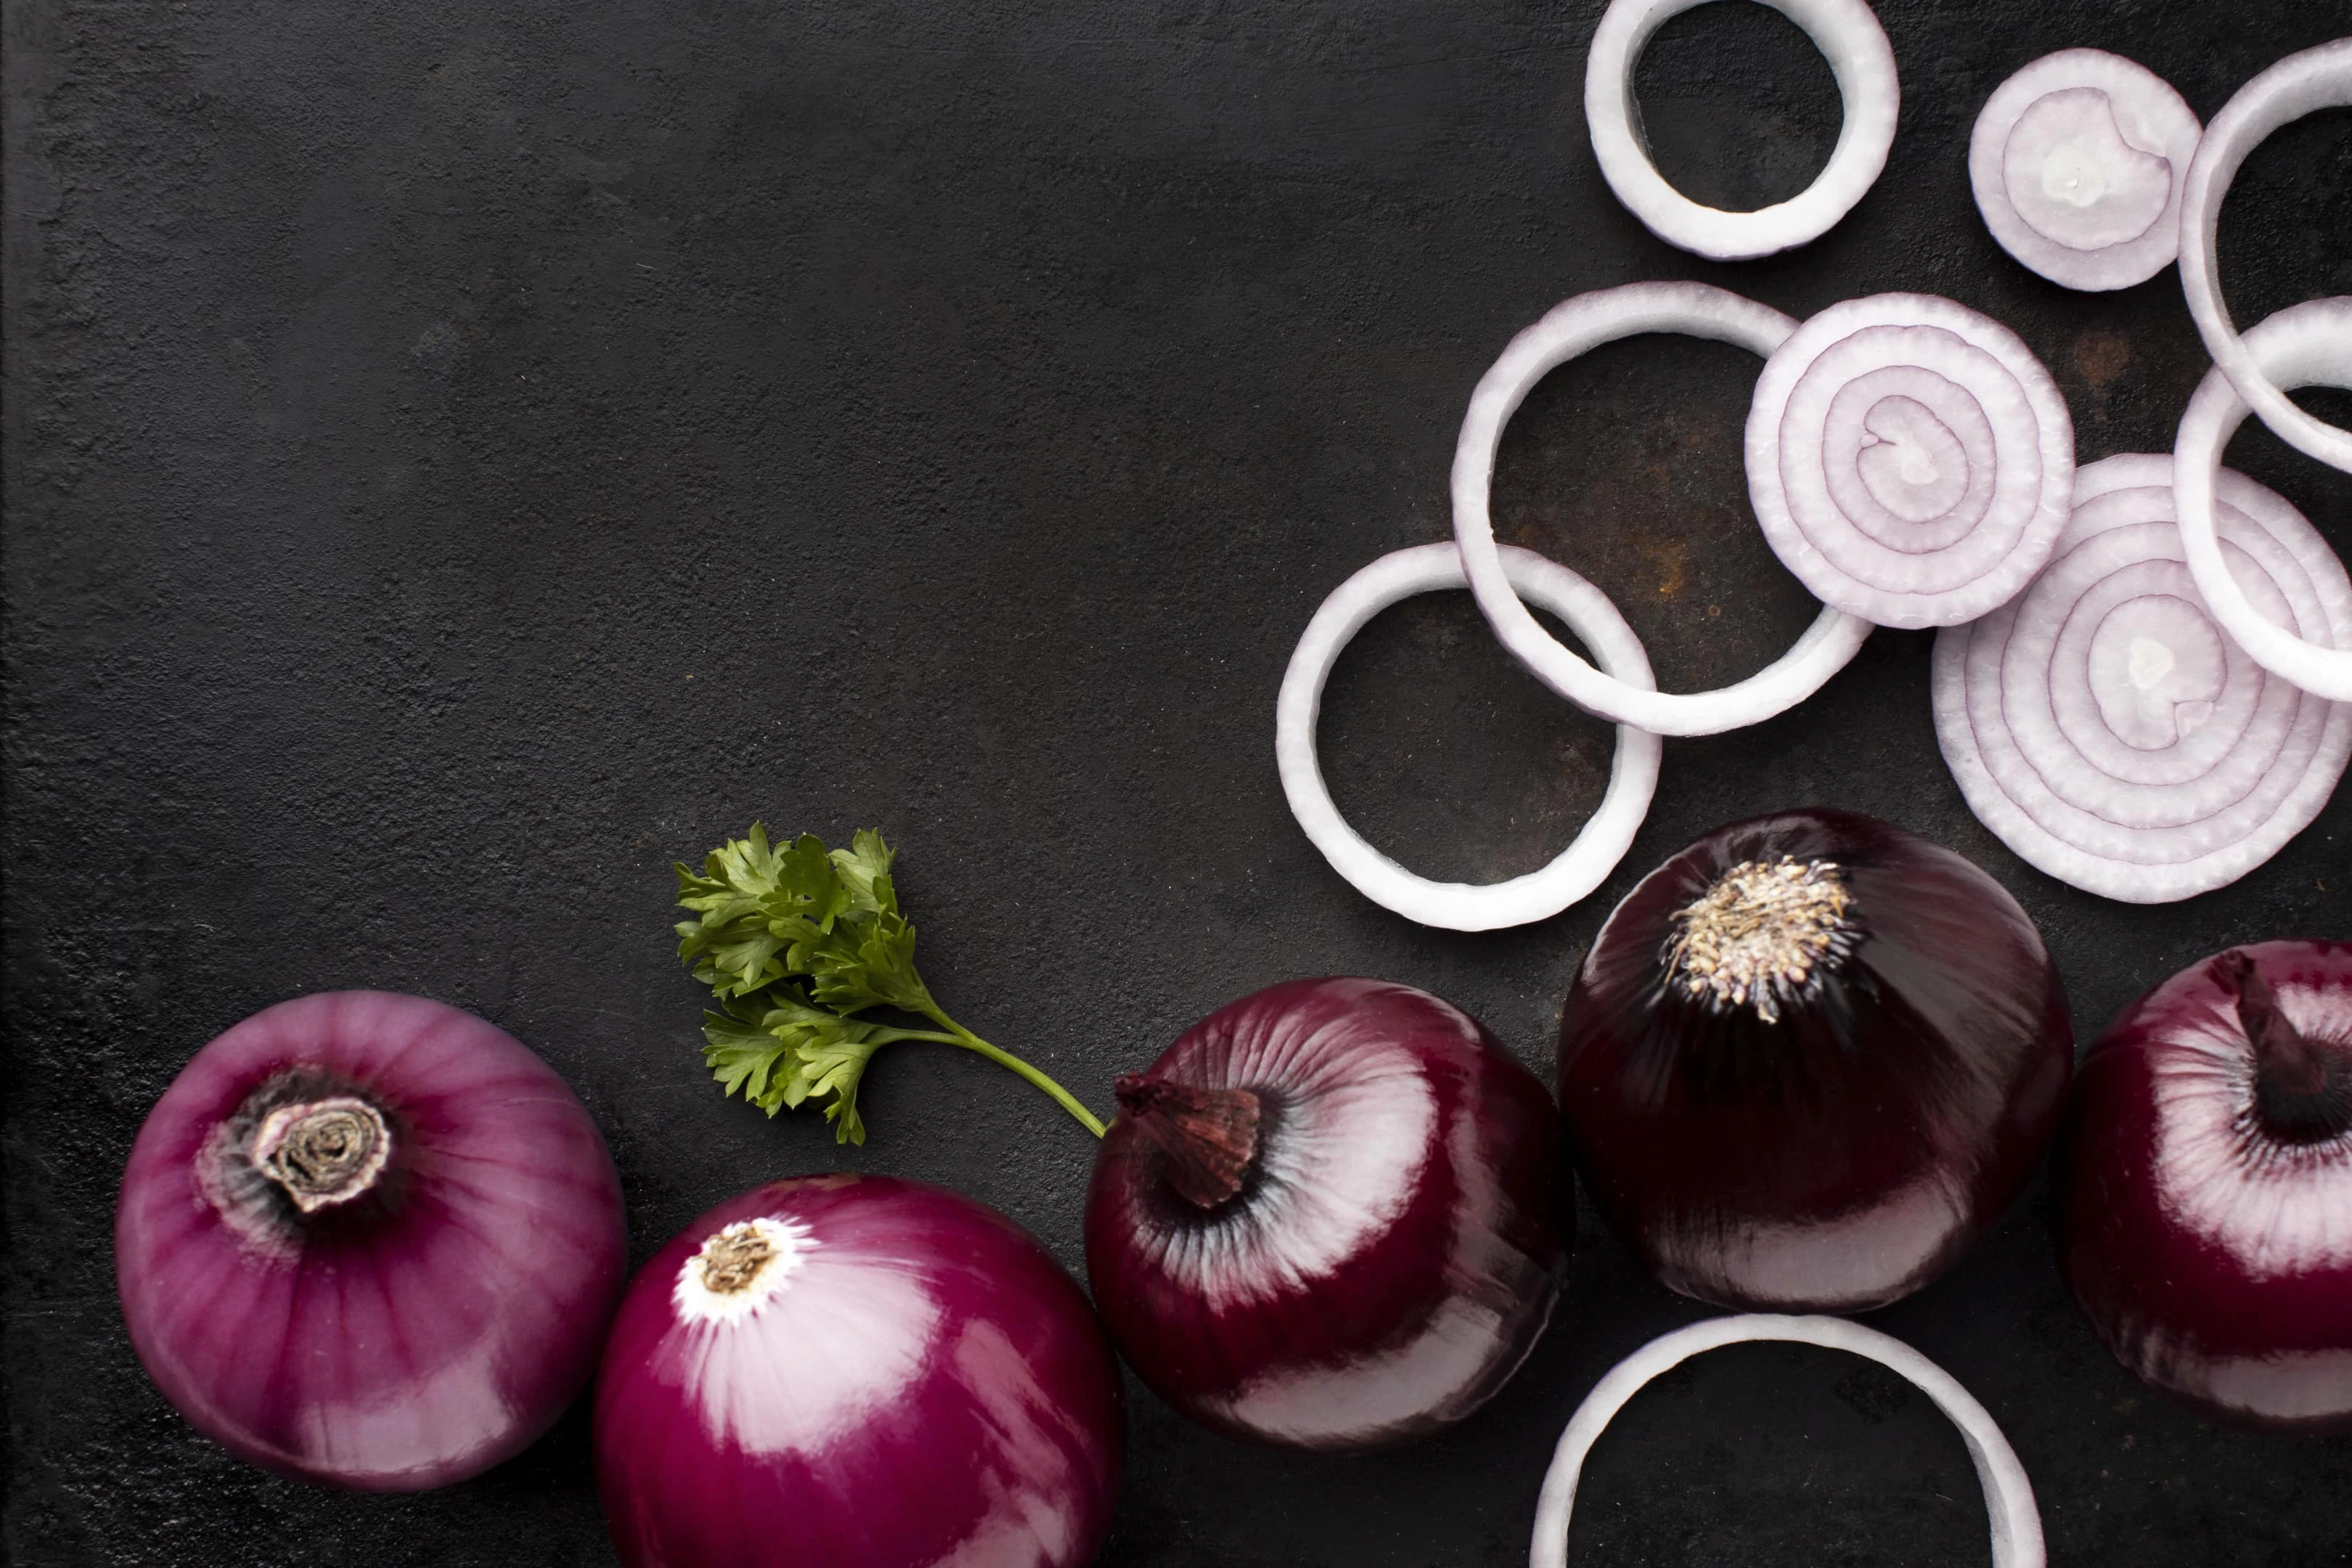 Arrangement of red onions on grey table